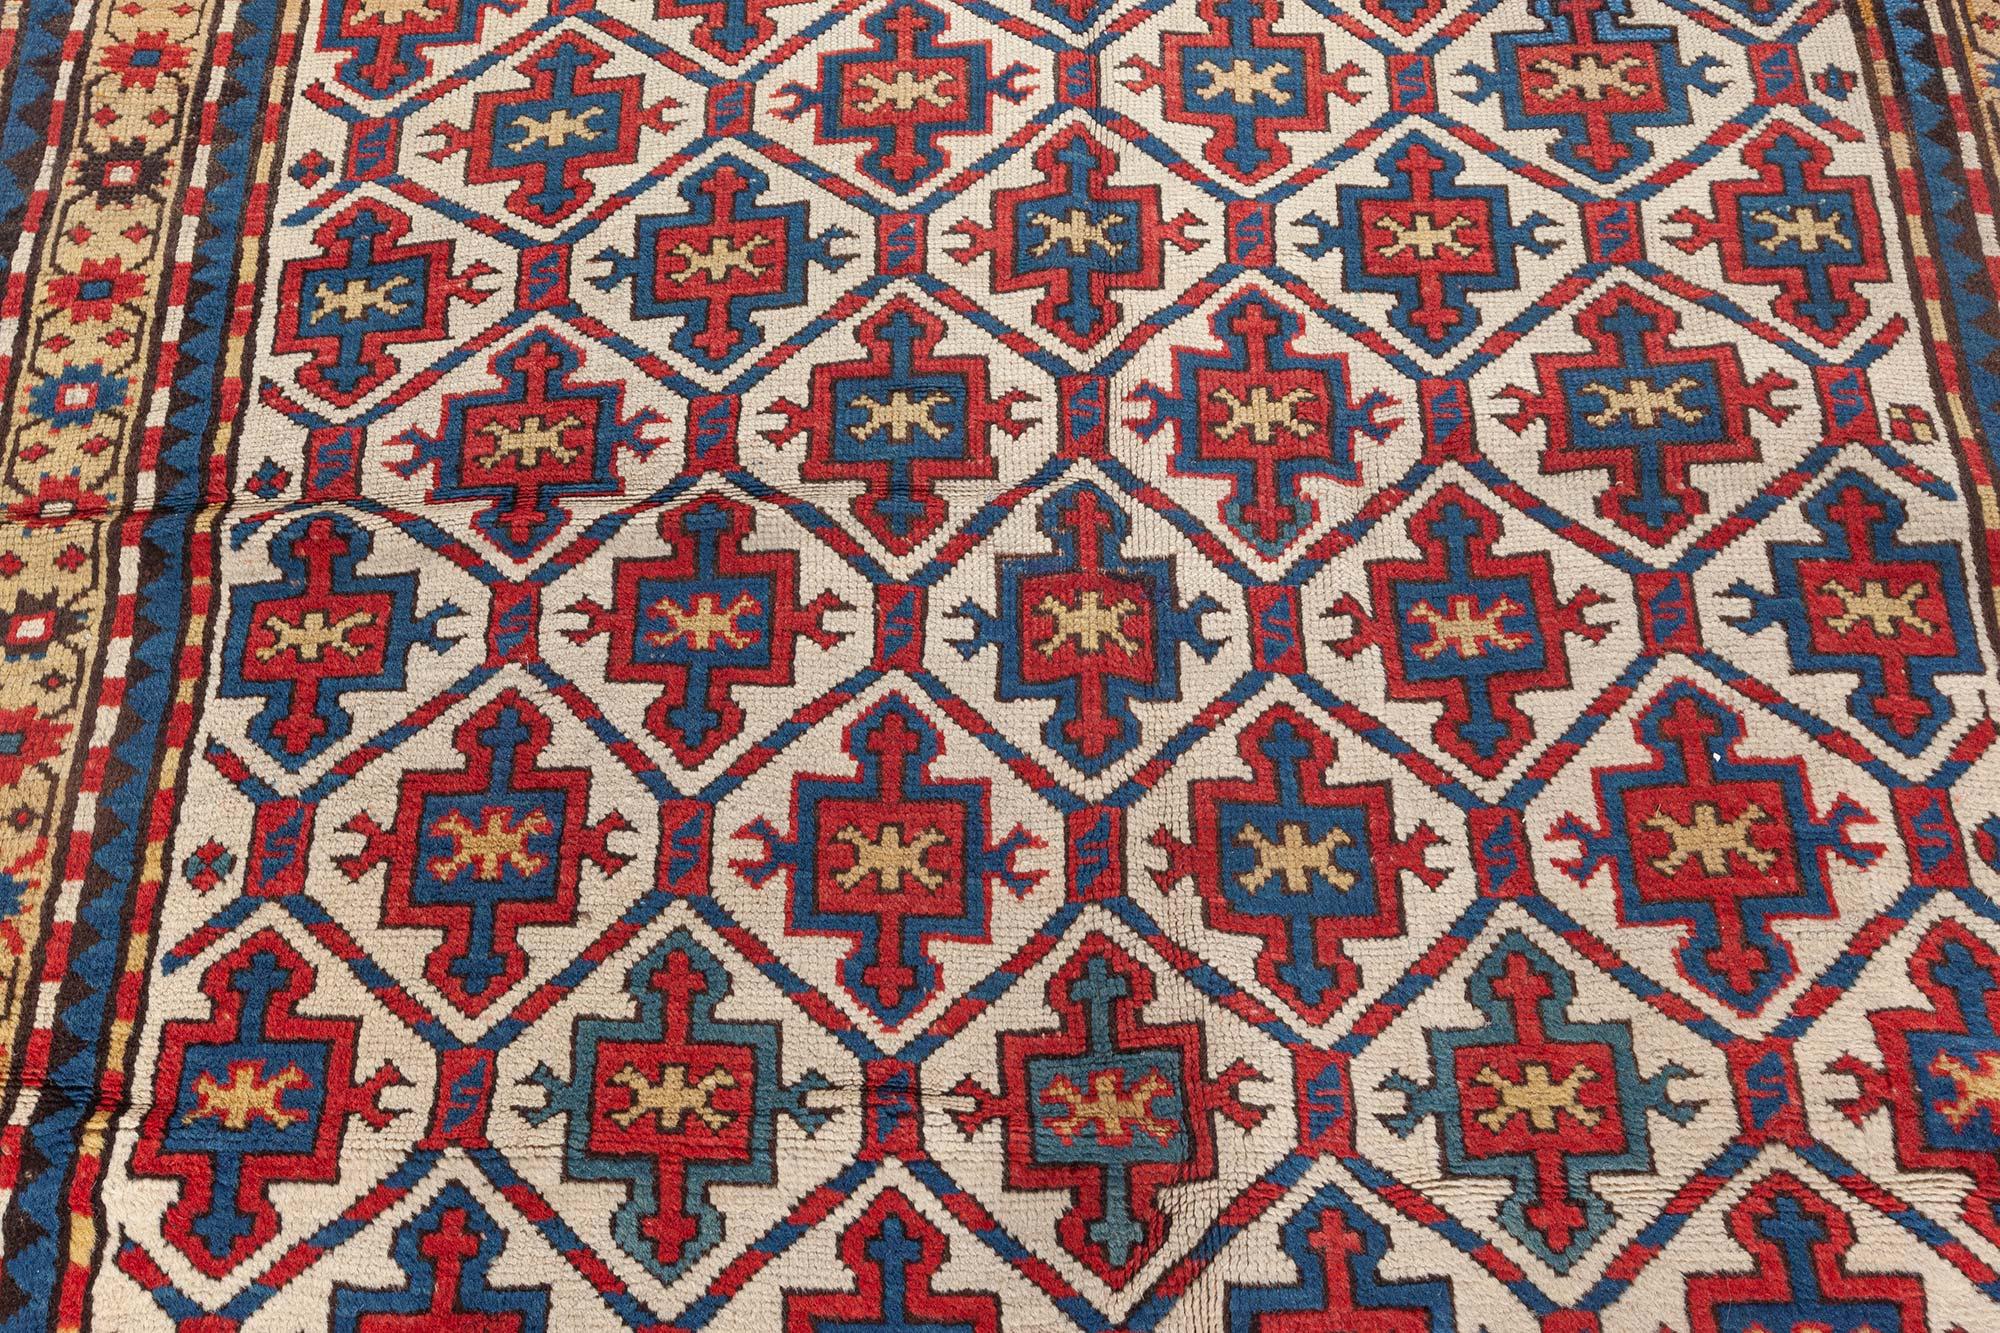 19th century Kazak handmade wool rug in red, yellow and blue
Size: 4'4